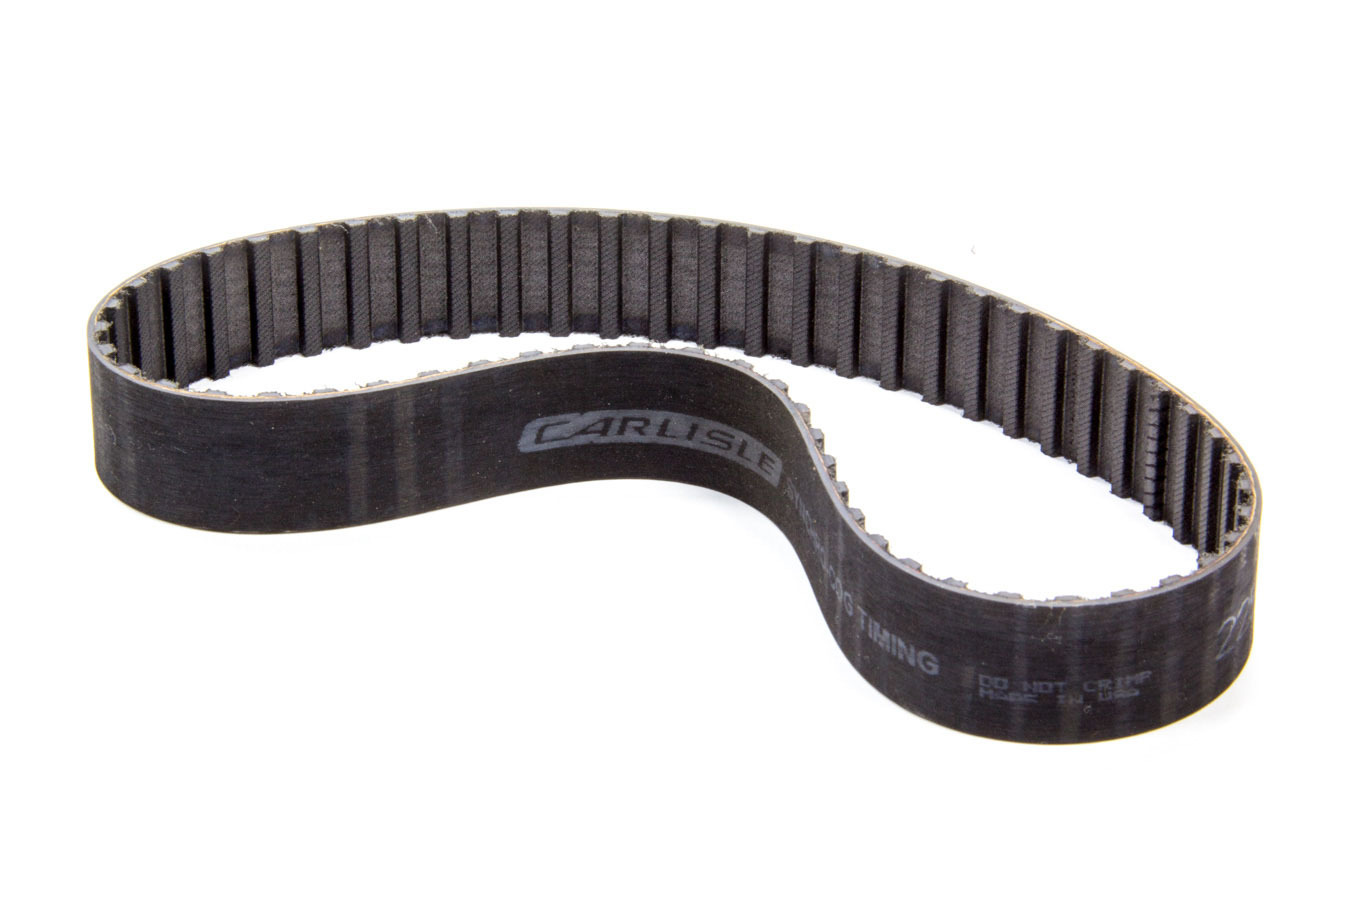 Stock Car Products 255L100 Gilmer Drive Belt, 25.500 in Long, 1 in Wide, 3/8 in Pitch, Each